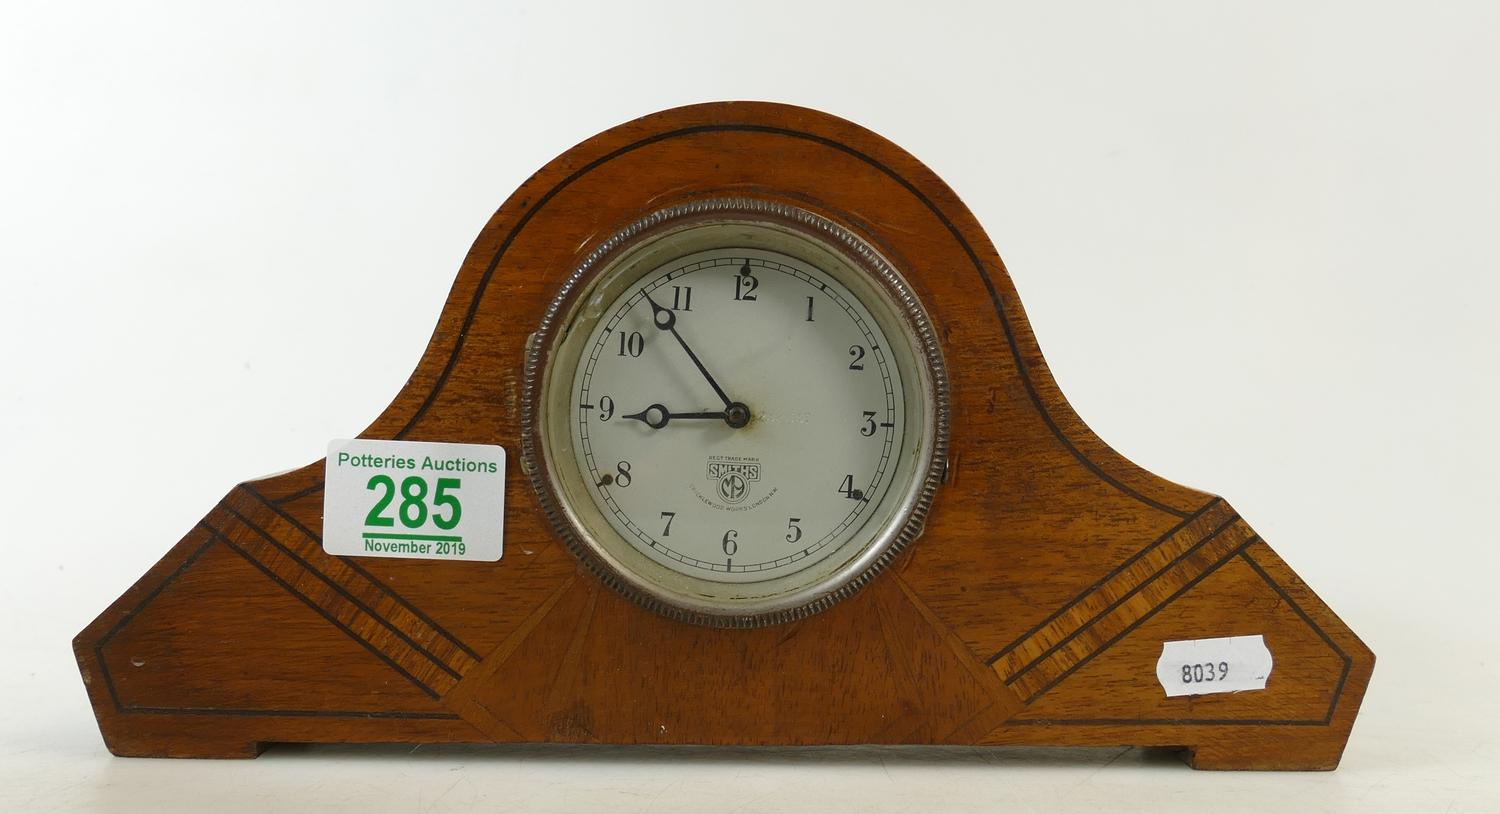 Smiths car clock set in case: Smiths car clock from the Cricklewood factory, set in Ap30's wooded